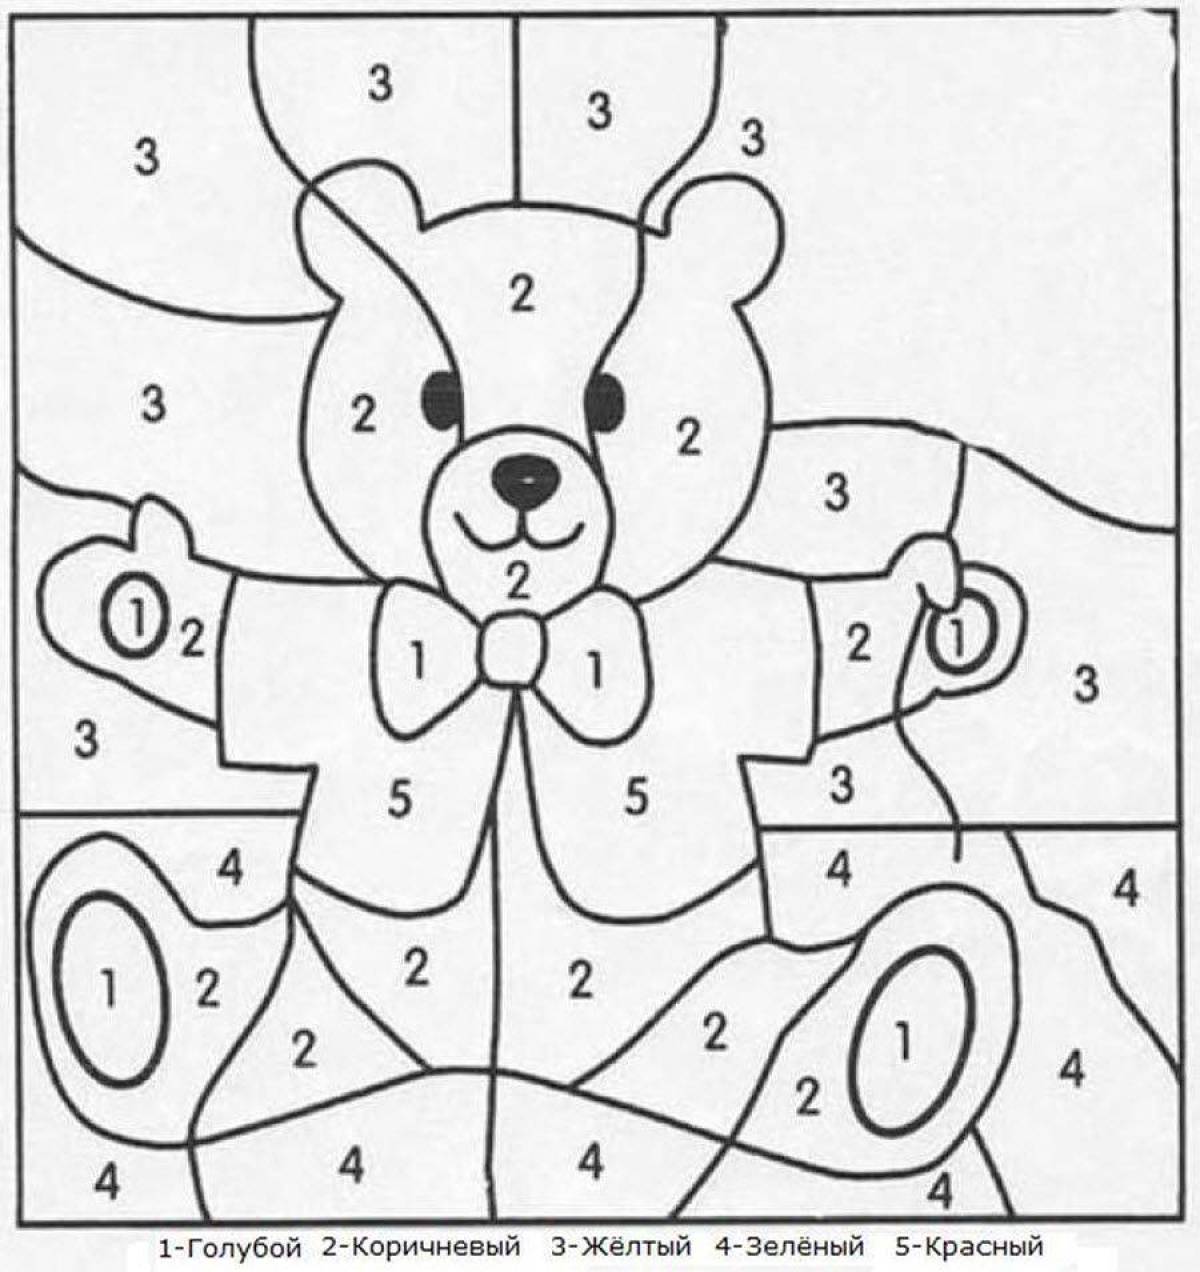 Stimulating coloring pages for kids